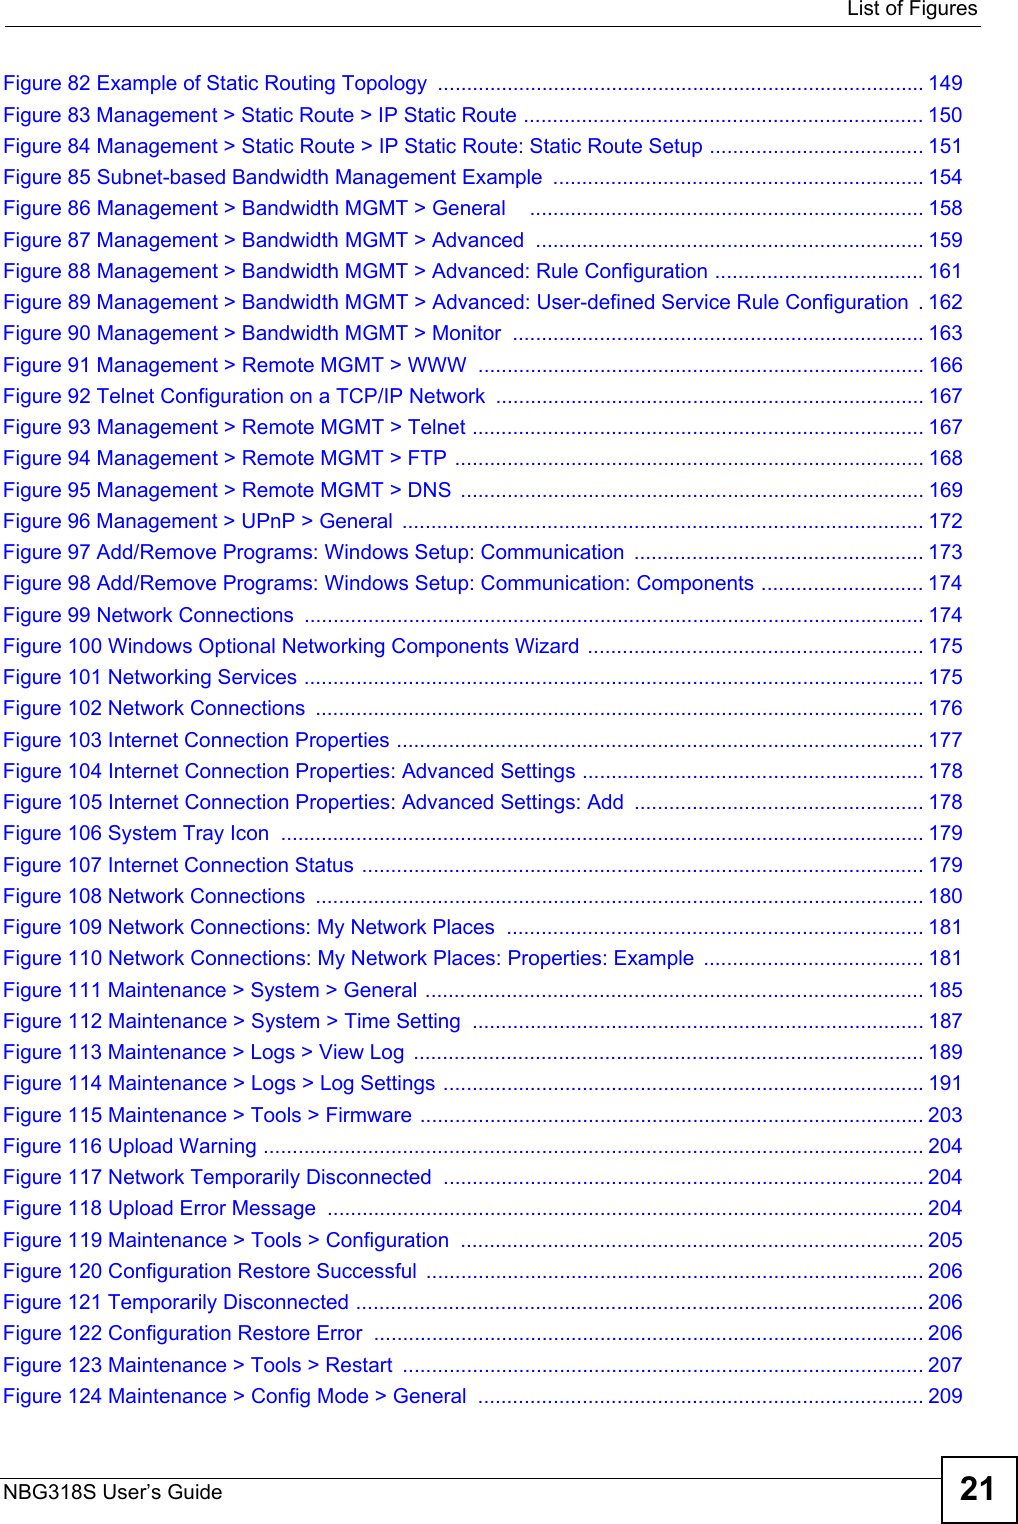  List of FiguresNBG318S User’s Guide 21Figure 82 Example of Static Routing Topology  .................................................................................... 149Figure 83 Management &gt; Static Route &gt; IP Static Route ..................................................................... 150Figure 84 Management &gt; Static Route &gt; IP Static Route: Static Route Setup ..................................... 151Figure 85 Subnet-based Bandwidth Management Example  ................................................................ 154Figure 86 Management &gt; Bandwidth MGMT &gt; General    .................................................................... 158Figure 87 Management &gt; Bandwidth MGMT &gt; Advanced  ................................................................... 159Figure 88 Management &gt; Bandwidth MGMT &gt; Advanced: Rule Configuration .................................... 161Figure 89 Management &gt; Bandwidth MGMT &gt; Advanced: User-defined Service Rule Configuration  . 162Figure 90 Management &gt; Bandwidth MGMT &gt; Monitor  ....................................................................... 163Figure 91 Management &gt; Remote MGMT &gt; WWW  ............................................................................. 166Figure 92 Telnet Configuration on a TCP/IP Network .......................................................................... 167Figure 93 Management &gt; Remote MGMT &gt; Telnet .............................................................................. 167Figure 94 Management &gt; Remote MGMT &gt; FTP ................................................................................. 168Figure 95 Management &gt; Remote MGMT &gt; DNS  ................................................................................ 169Figure 96 Management &gt; UPnP &gt; General  ..........................................................................................172Figure 97 Add/Remove Programs: Windows Setup: Communication  .................................................. 173Figure 98 Add/Remove Programs: Windows Setup: Communication: Components ............................ 174Figure 99 Network Connections  ........................................................................................................... 174Figure 100 Windows Optional Networking Components Wizard .......................................................... 175Figure 101 Networking Services ........................................................................................................... 175Figure 102 Network Connections  ......................................................................................................... 176Figure 103 Internet Connection Properties ........................................................................................... 177Figure 104 Internet Connection Properties: Advanced Settings ........................................................... 178Figure 105 Internet Connection Properties: Advanced Settings: Add  .................................................. 178Figure 106 System Tray Icon  ............................................................................................................... 179Figure 107 Internet Connection Status ................................................................................................. 179Figure 108 Network Connections  ......................................................................................................... 180Figure 109 Network Connections: My Network Places  ........................................................................ 181Figure 110 Network Connections: My Network Places: Properties: Example  ...................................... 181Figure 111 Maintenance &gt; System &gt; General ......................................................................................185Figure 112 Maintenance &gt; System &gt; Time Setting  .............................................................................. 187Figure 113 Maintenance &gt; Logs &gt; View Log  ........................................................................................ 189Figure 114 Maintenance &gt; Logs &gt; Log Settings ...................................................................................191Figure 115 Maintenance &gt; Tools &gt; Firmware ....................................................................................... 203Figure 116 Upload Warning .................................................................................................................. 204Figure 117 Network Temporarily Disconnected ................................................................................... 204Figure 118 Upload Error Message  ....................................................................................................... 204Figure 119 Maintenance &gt; Tools &gt; Configuration ................................................................................ 205Figure 120 Configuration Restore Successful  ...................................................................................... 206Figure 121 Temporarily Disconnected .................................................................................................. 206Figure 122 Configuration Restore Error  ............................................................................................... 206Figure 123 Maintenance &gt; Tools &gt; Restart  .......................................................................................... 207Figure 124 Maintenance &gt; Config Mode &gt; General  ............................................................................. 209